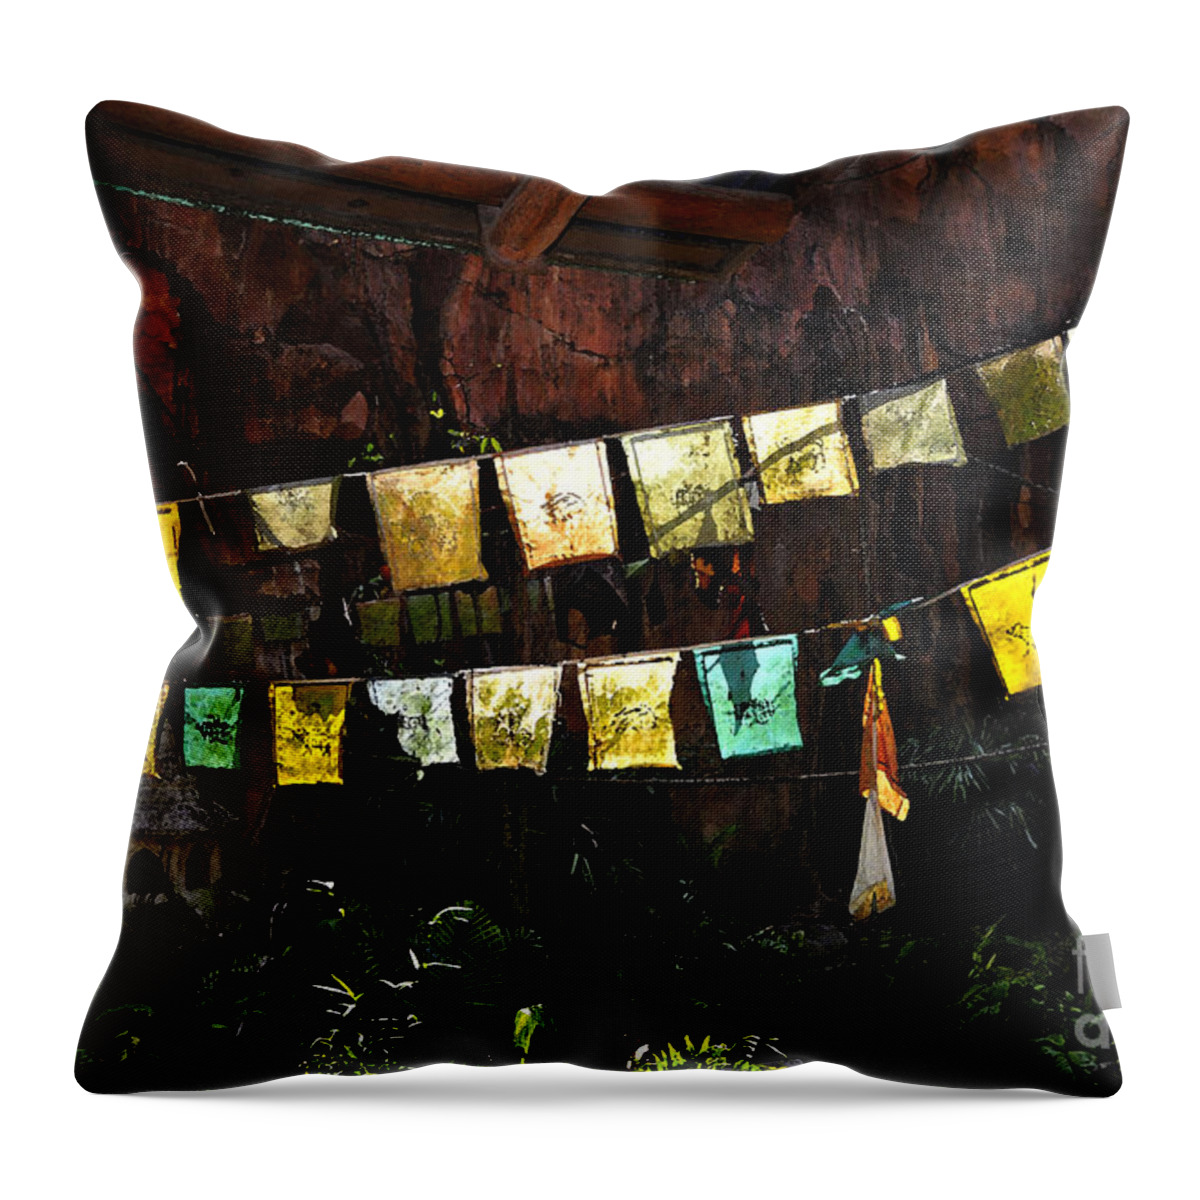 Prayer Flags Throw Pillow featuring the painting Prayer flags by David Lee Thompson